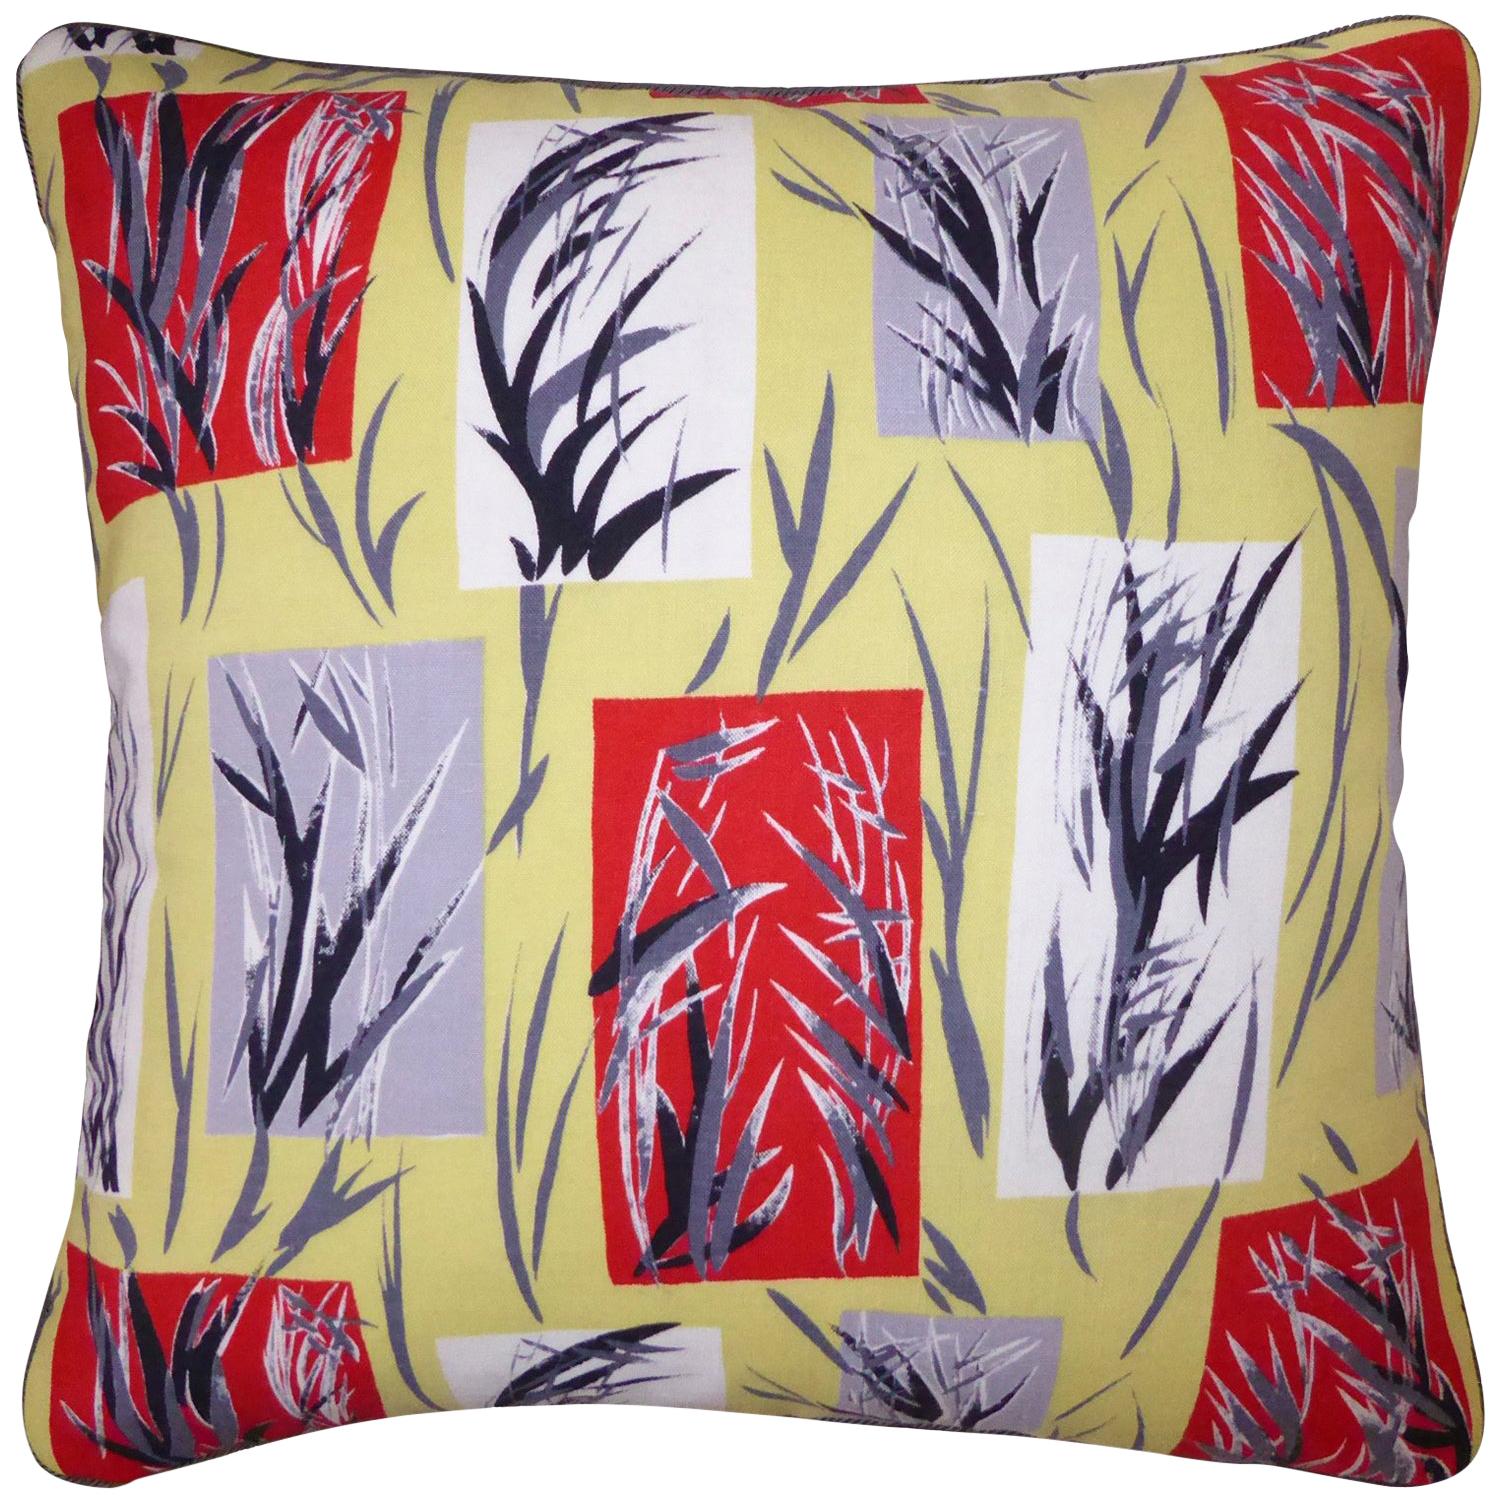 Vintage Cushions "Bamboo Leaves" 1950's Retro Pillow, Made in London